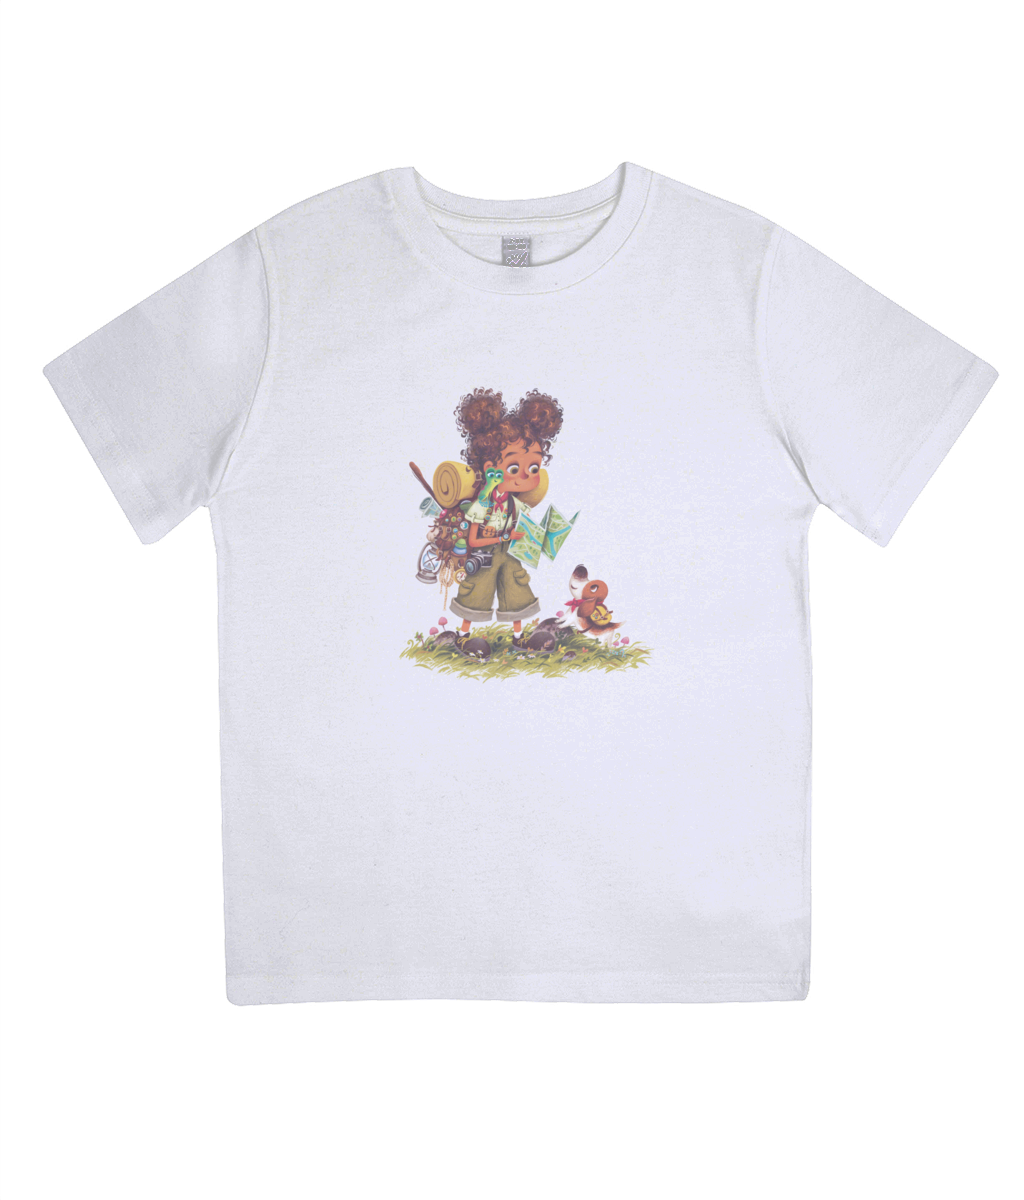 Classic Adventure of Scout T-shirt